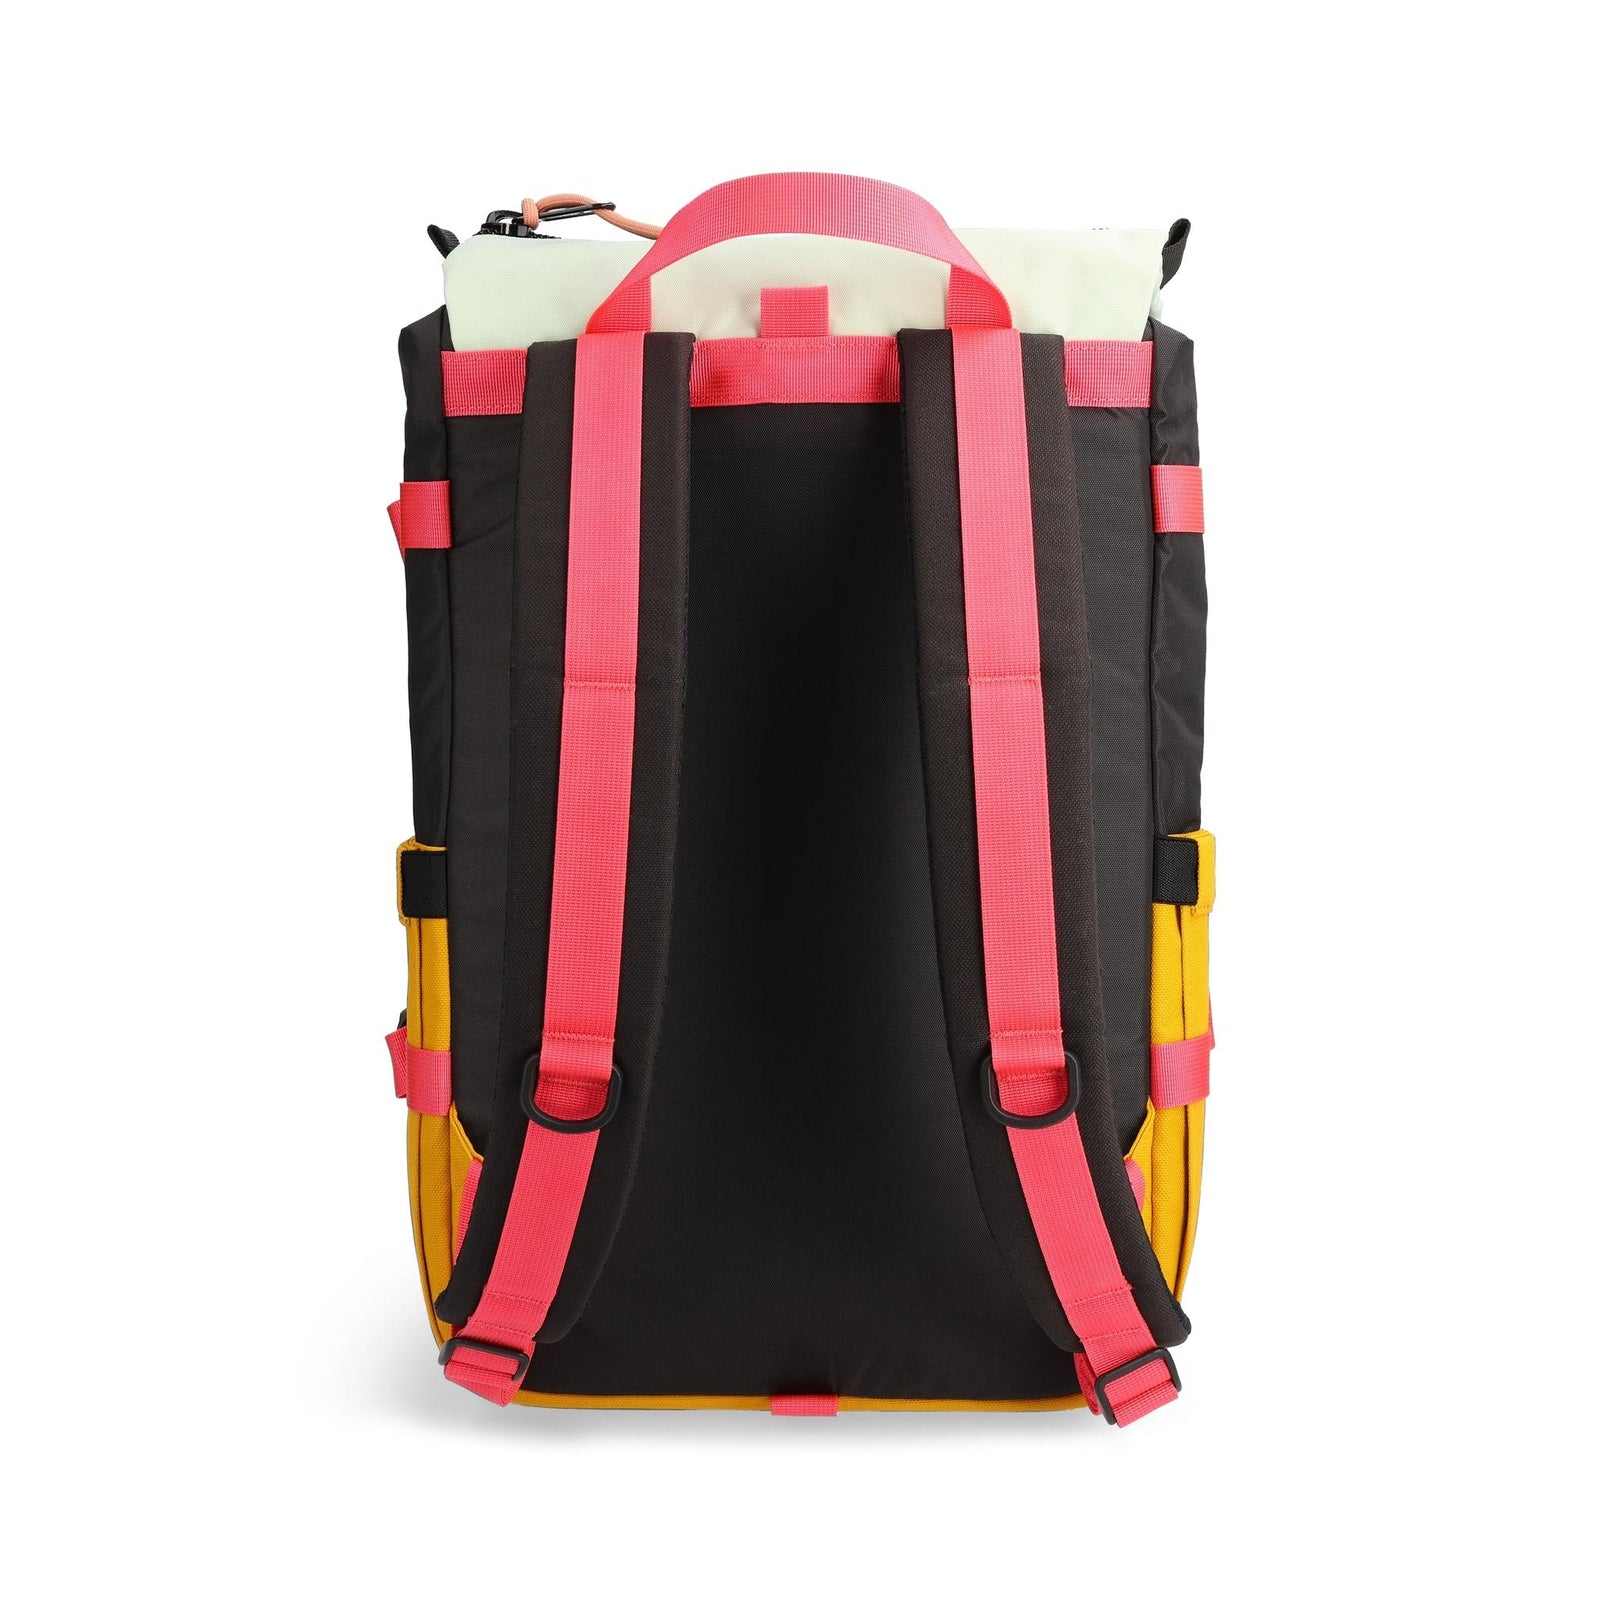 Back View of Topo Designs Rover Pack Classic in "Black / Mustard"